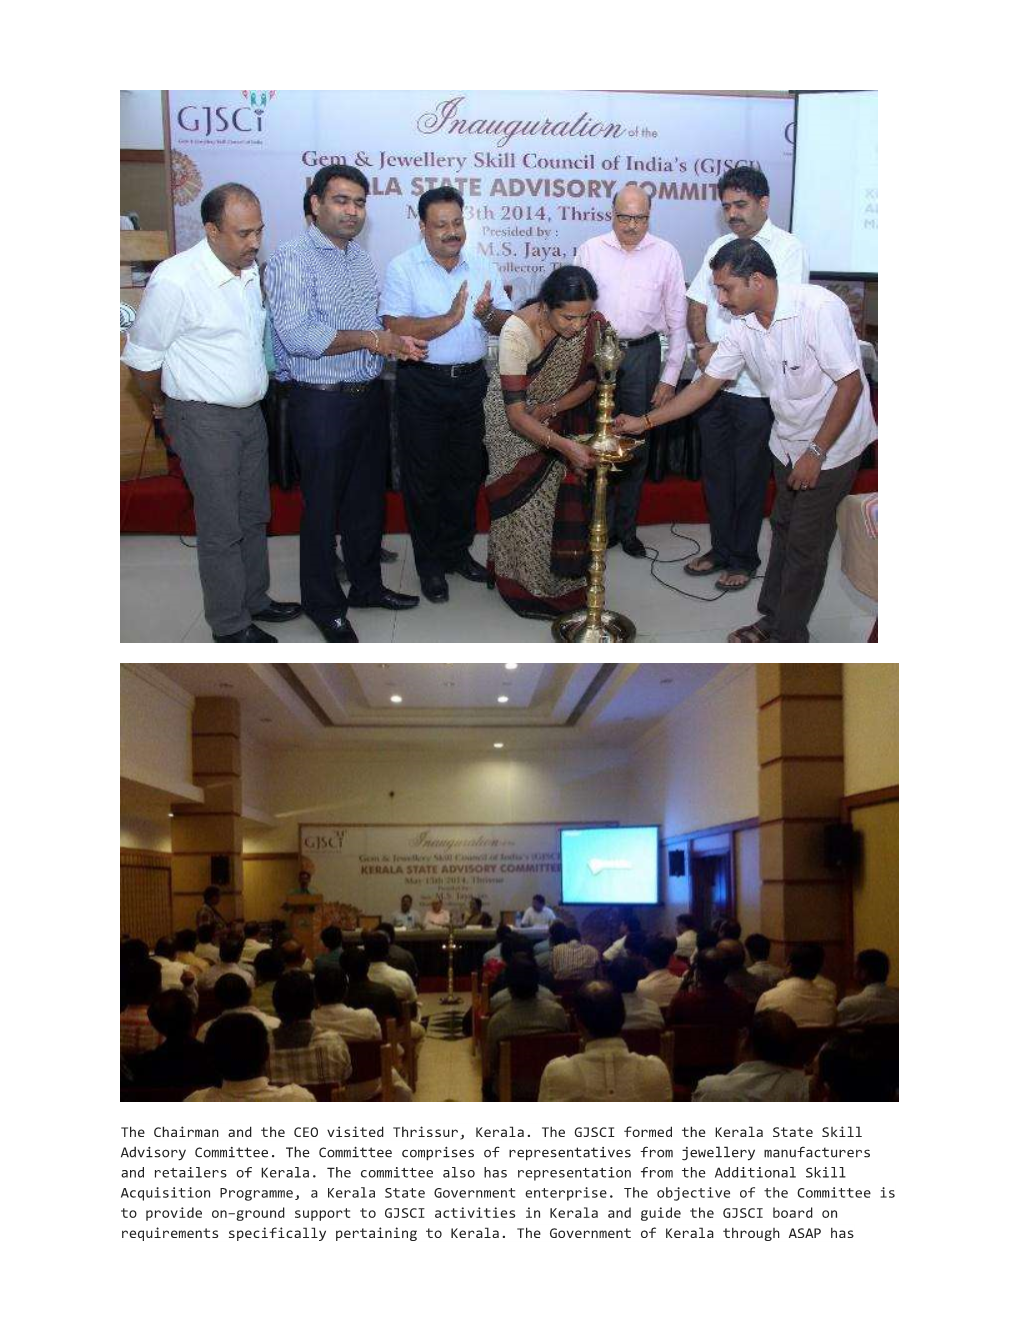 The Chairman and the CEO Visited Thrissur, Kerala. the GJSCI Formed the Kerala State Skill Advisory Committee. the Committee